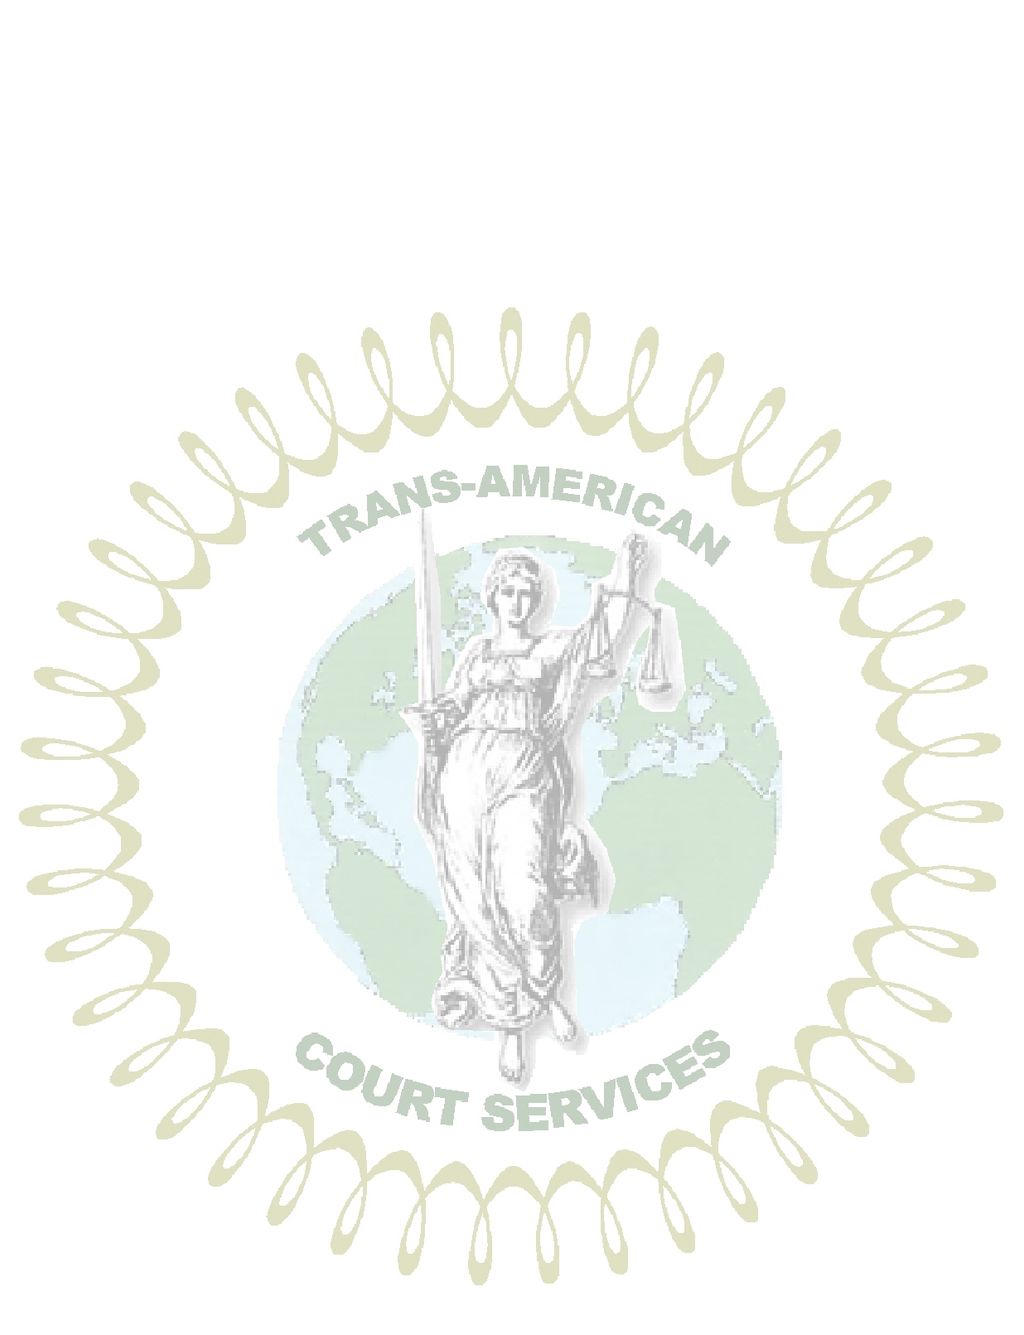 Trans-American Court Services